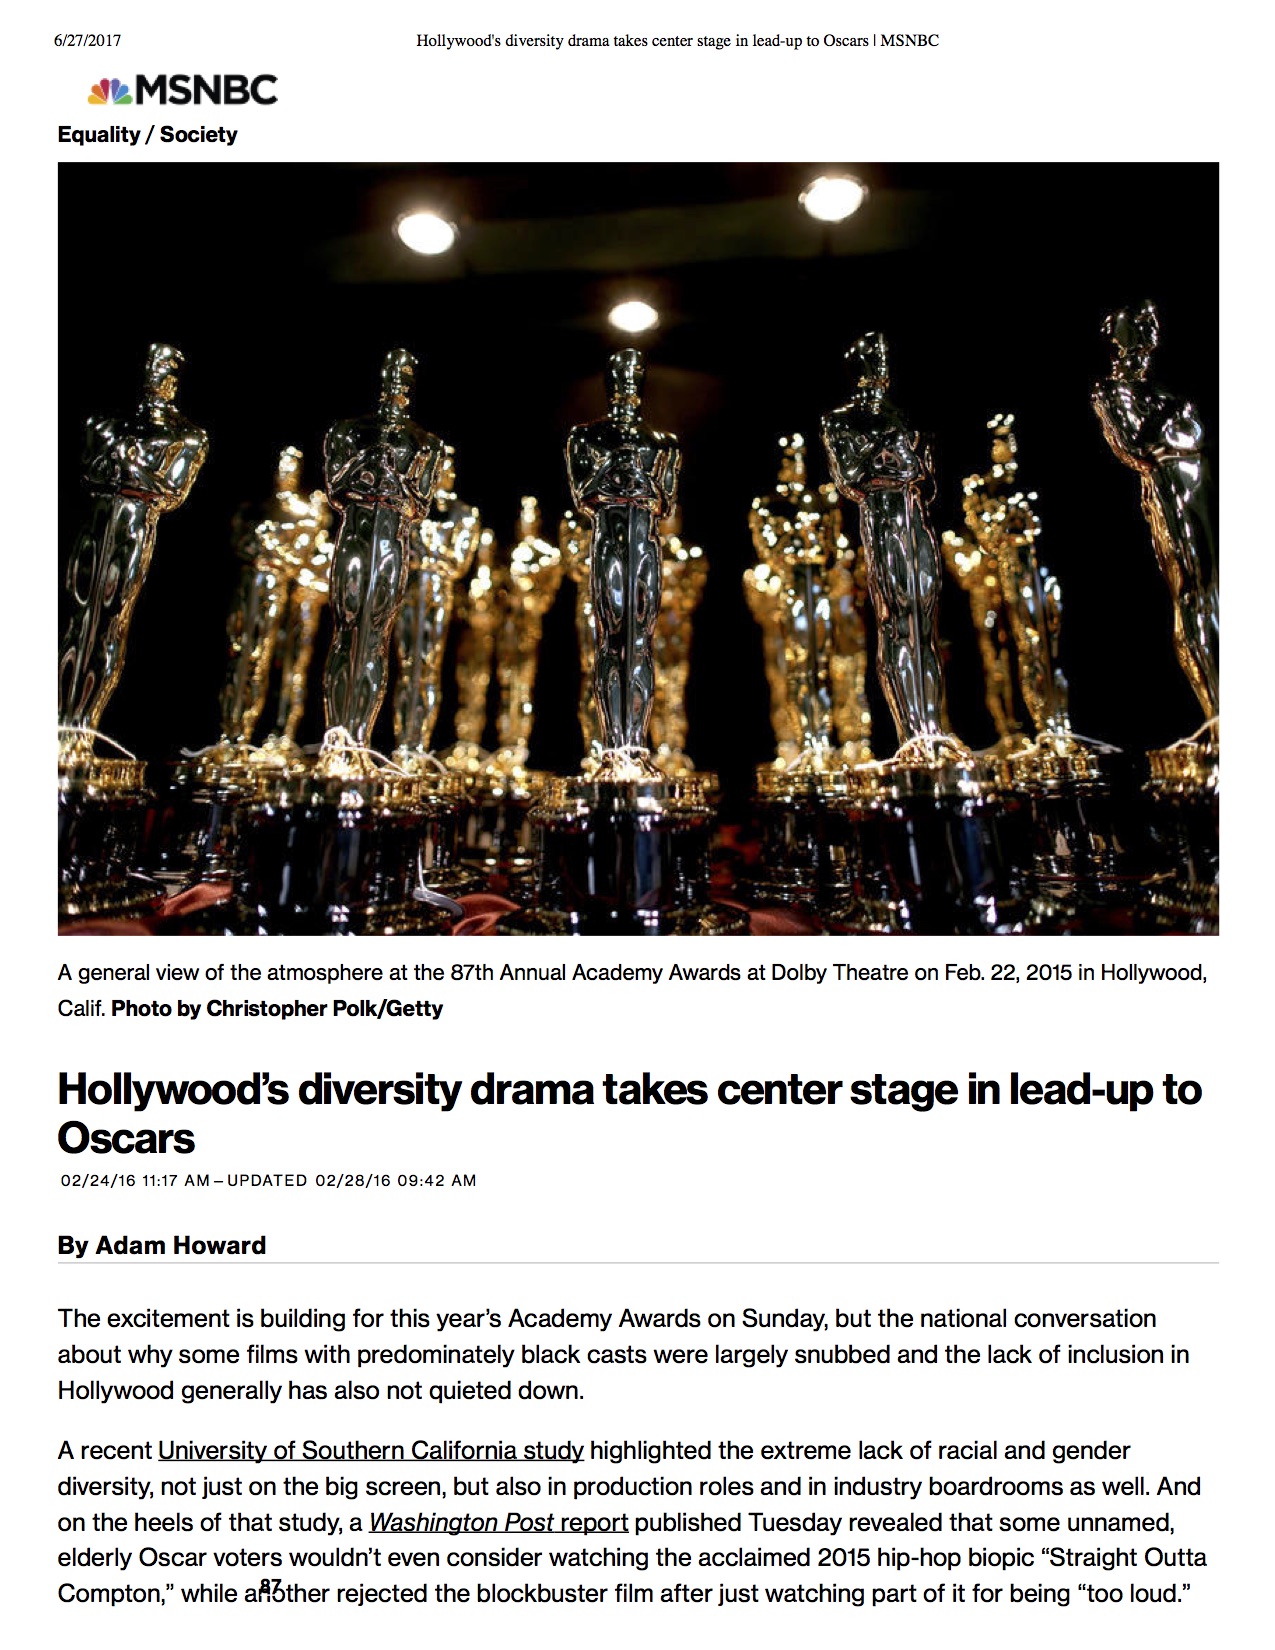 1Hollywood's diversity drama takes center stage in lead-up to Oscars _ MSNBC.jpg